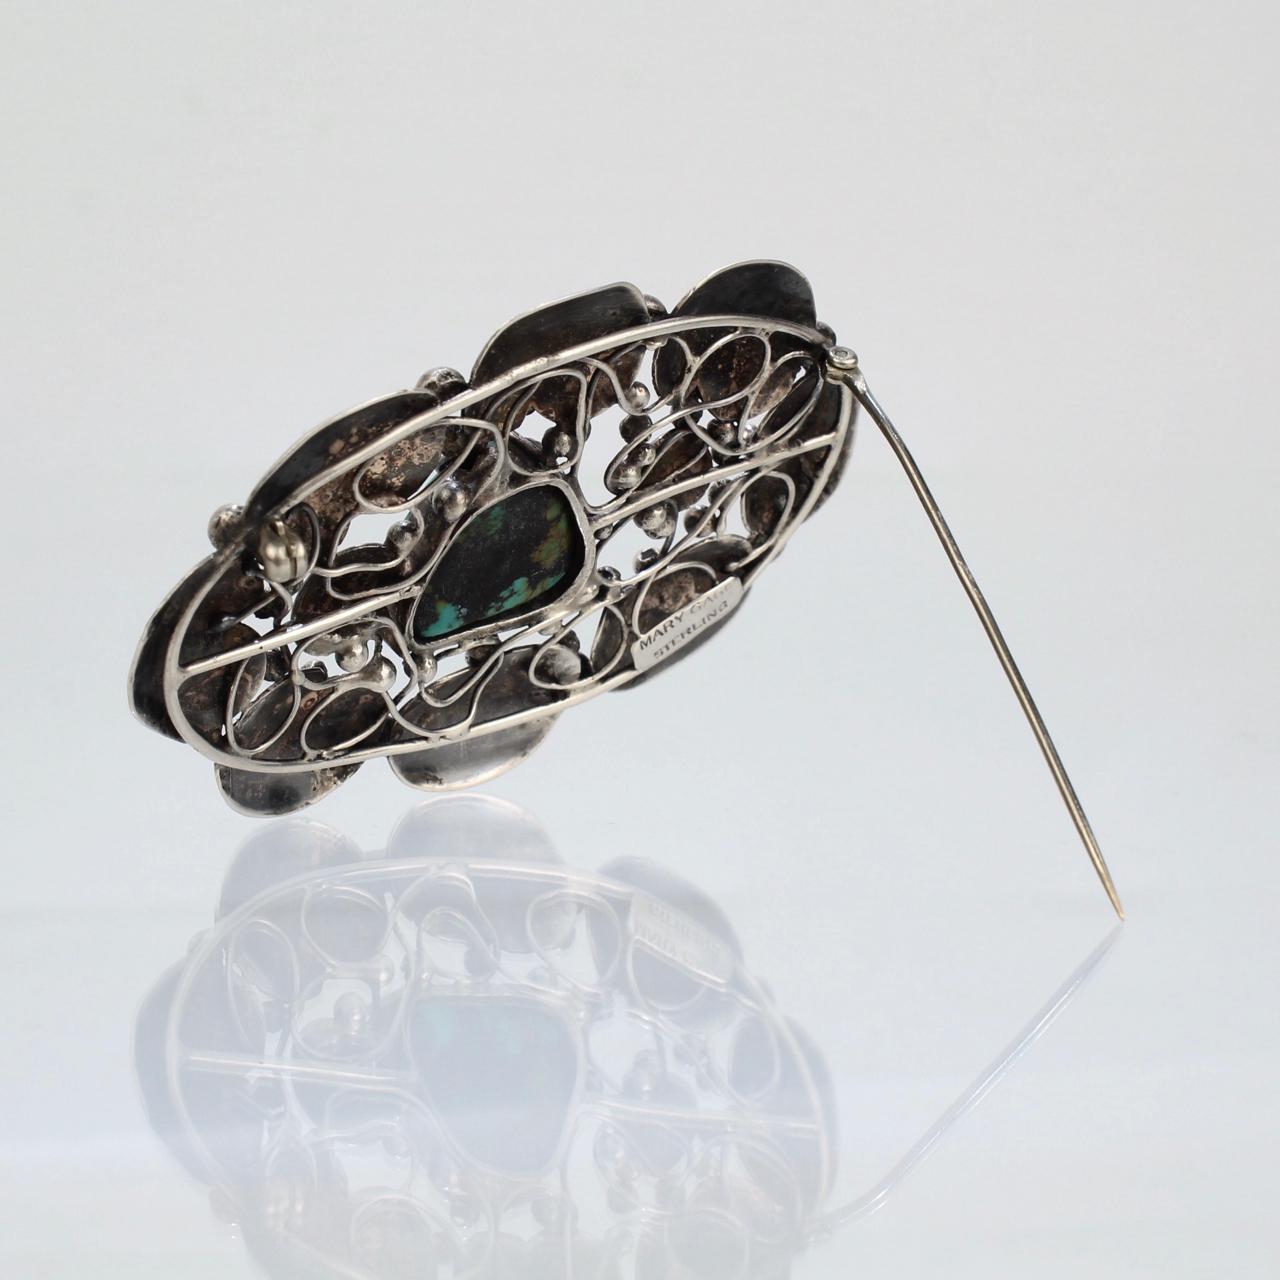 Arts and Crafts Mary Gage American Arts & Crafts Sterling Silver & Turquoise Lily Pad Brooch Pin